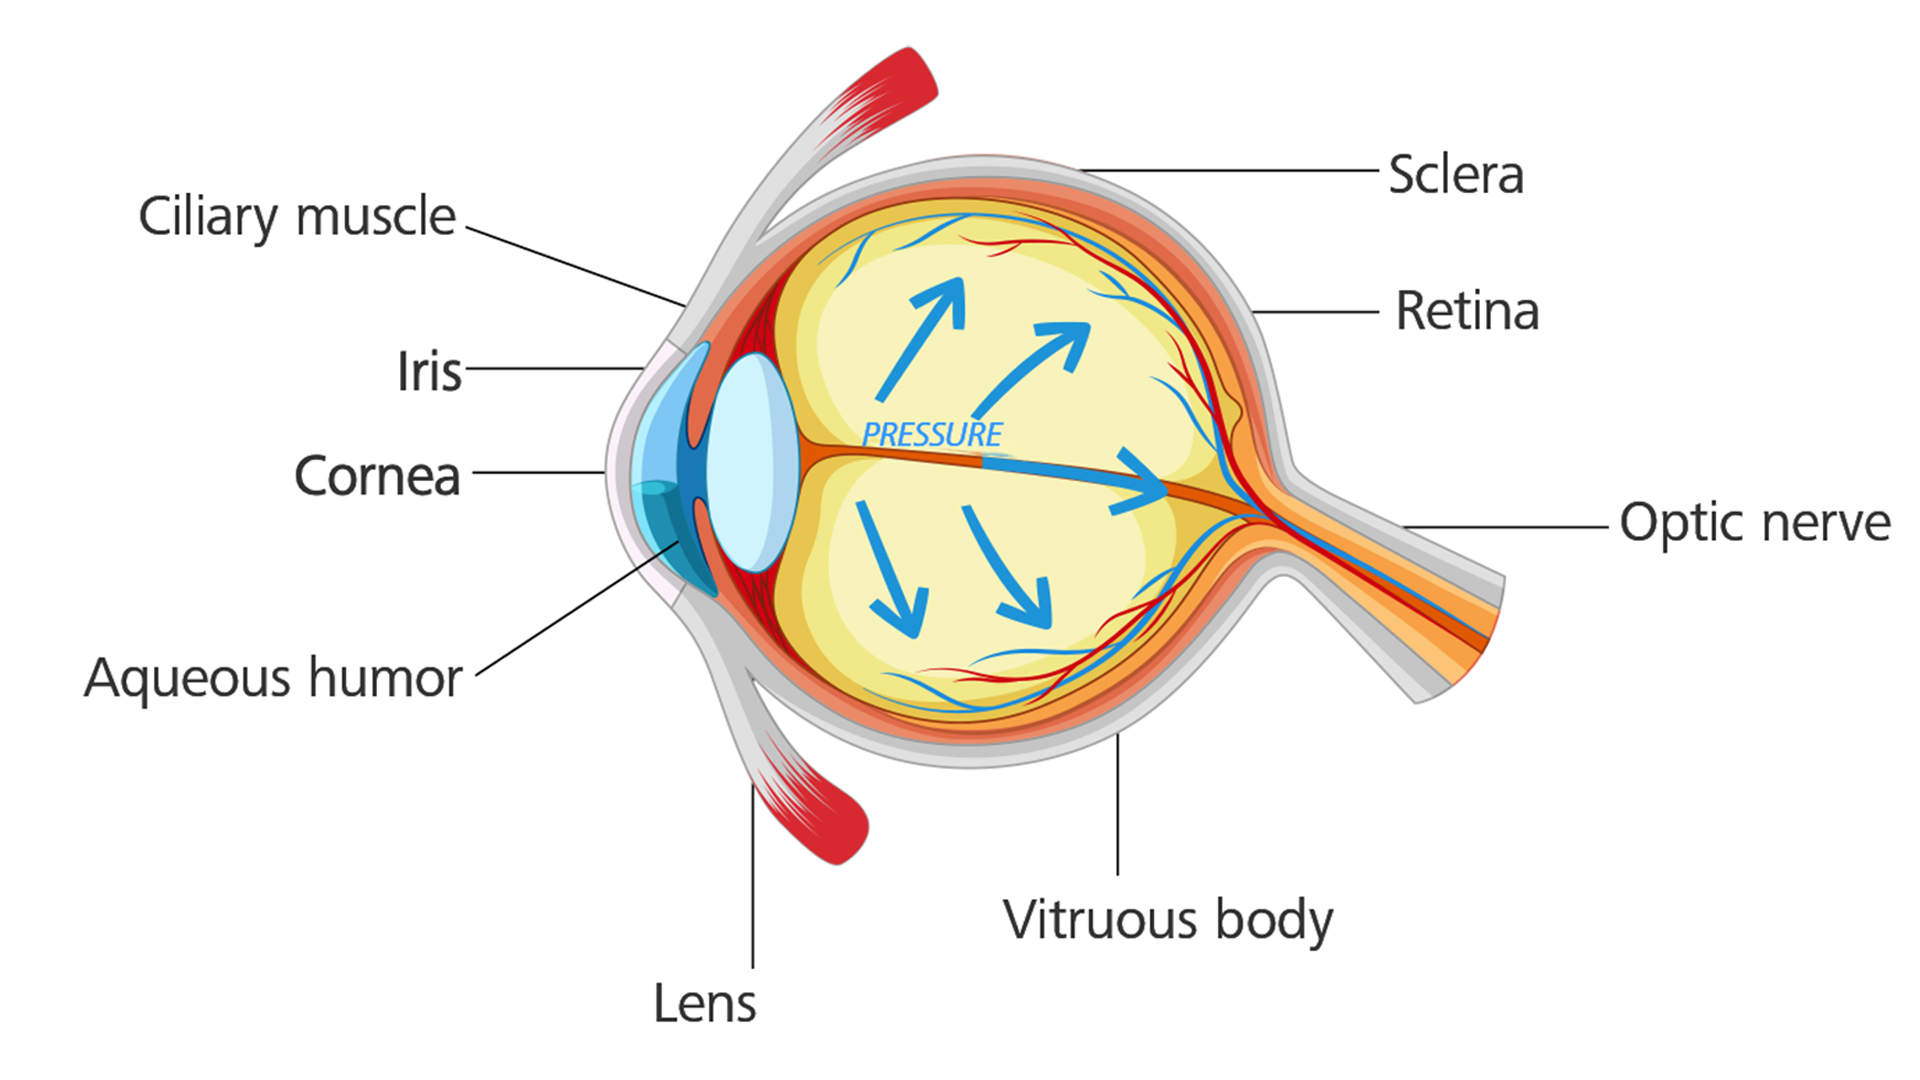 Eye with glaucoma: Eye pressure builds up and causes damage to the optic nerve.